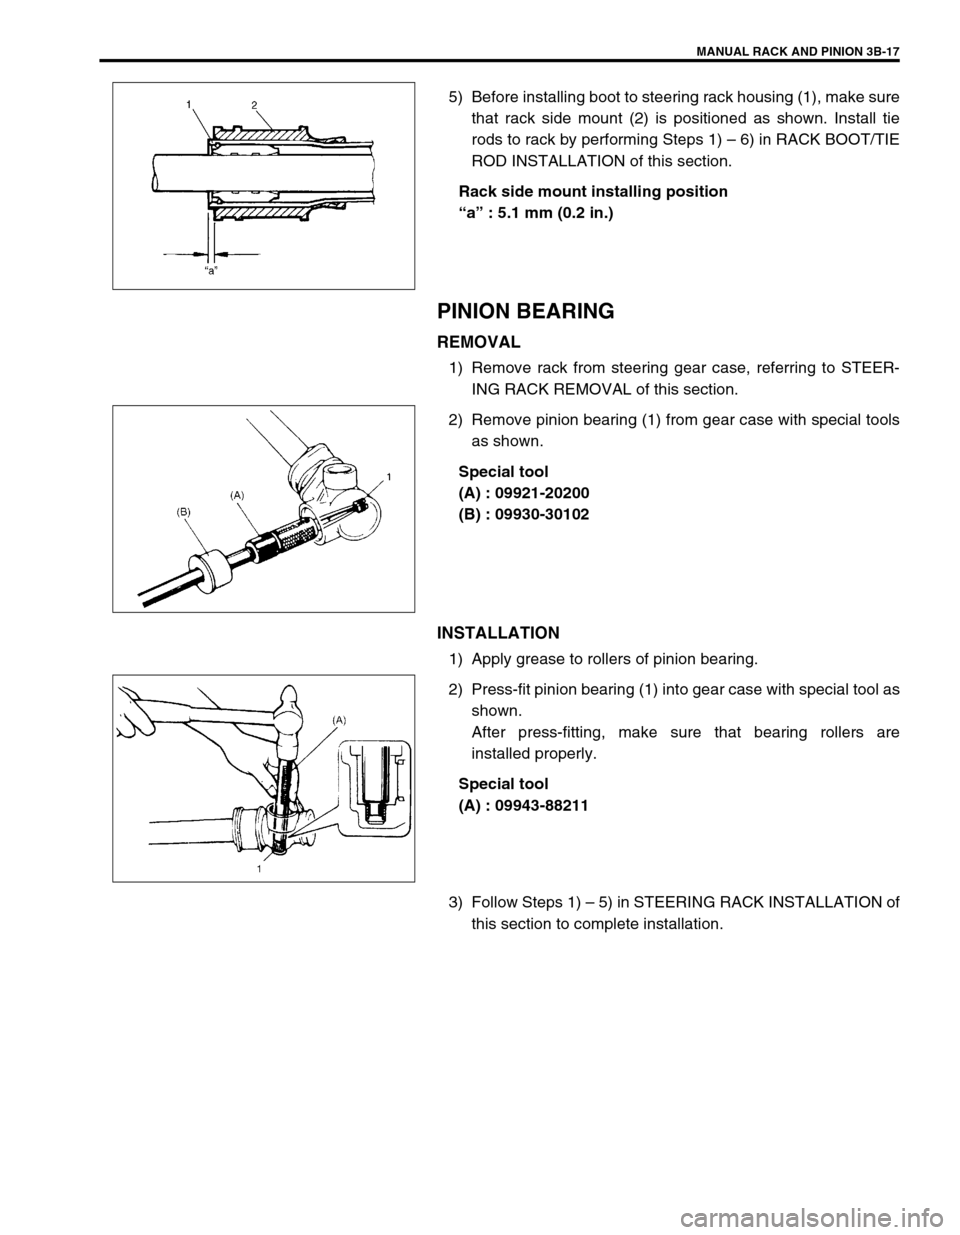 SUZUKI SWIFT 2000 1.G RG413 Service Workshop Manual MANUAL RACK AND PINION 3B-17
5) Before installing boot to steering rack housing (1), make sure
that rack side mount (2) is positioned as shown. Install tie
rods to rack by performing Steps 1) – 6) i